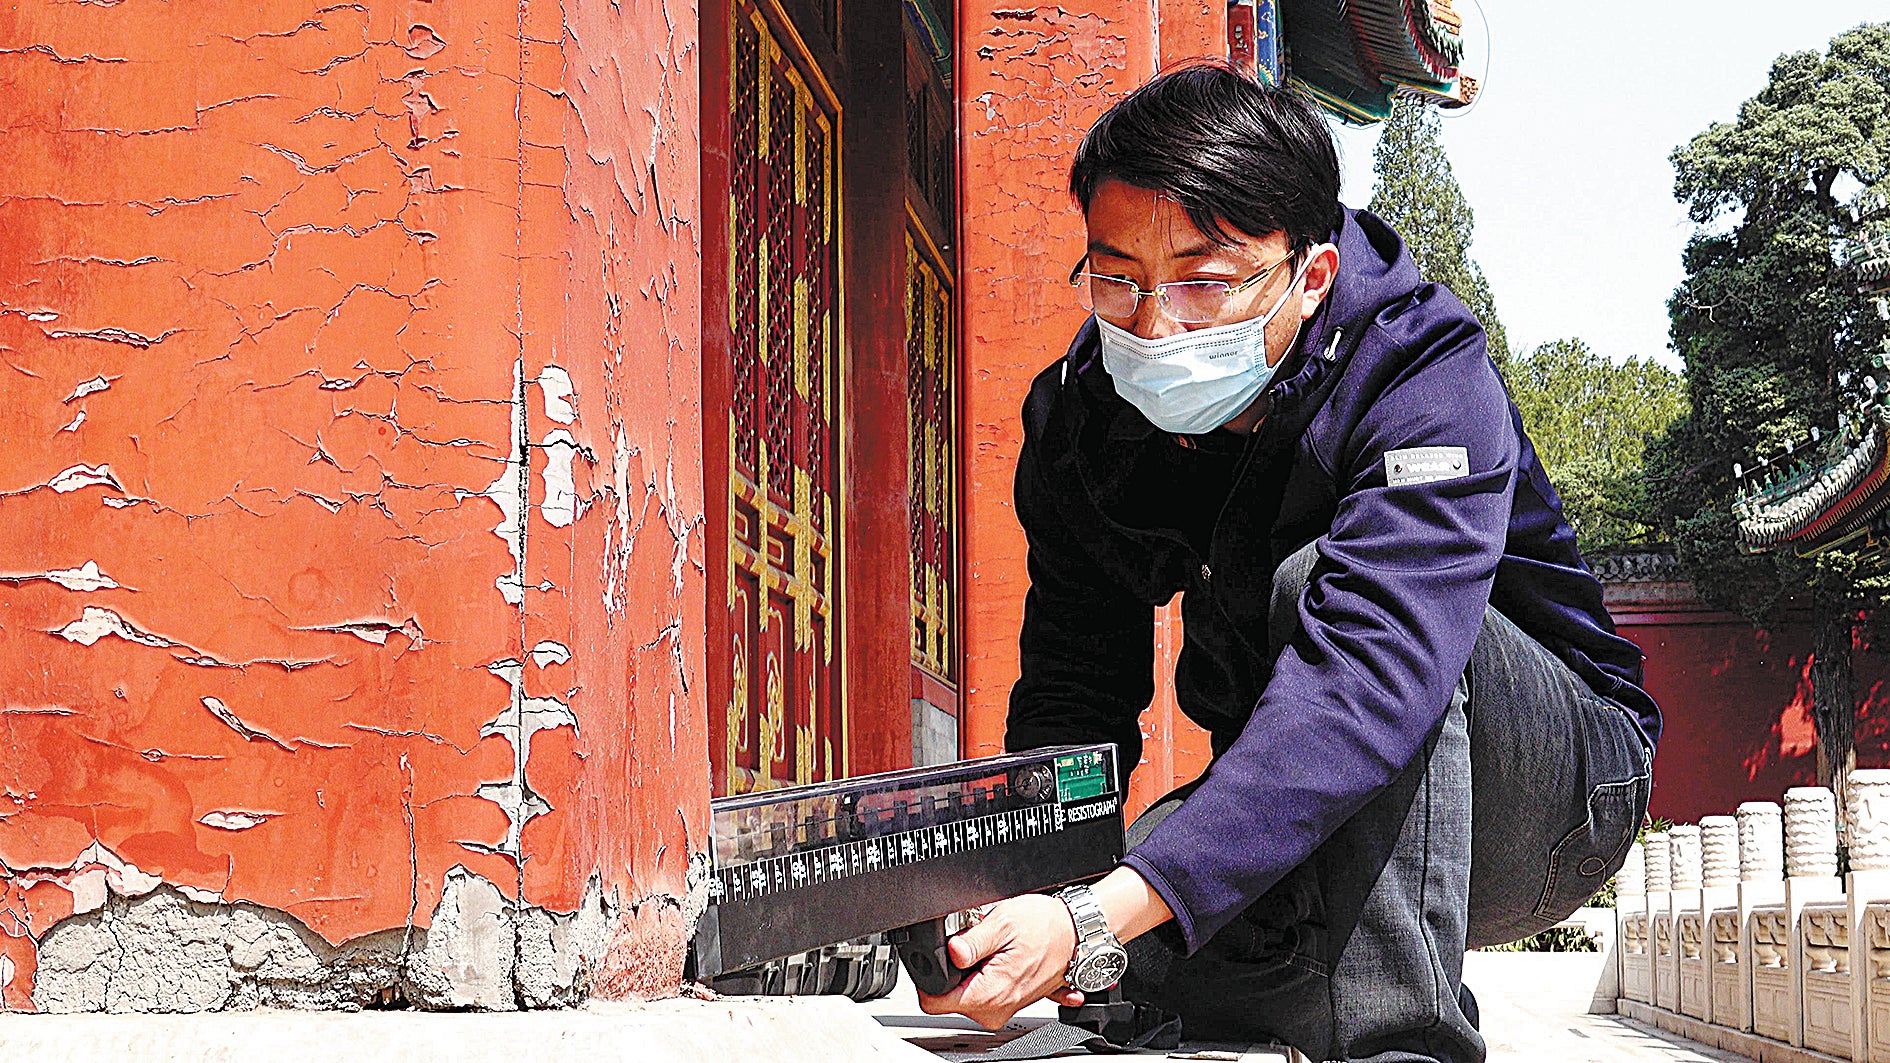 Zhang Tao tests a wooden pillar with a micro-drilling impedance analyser